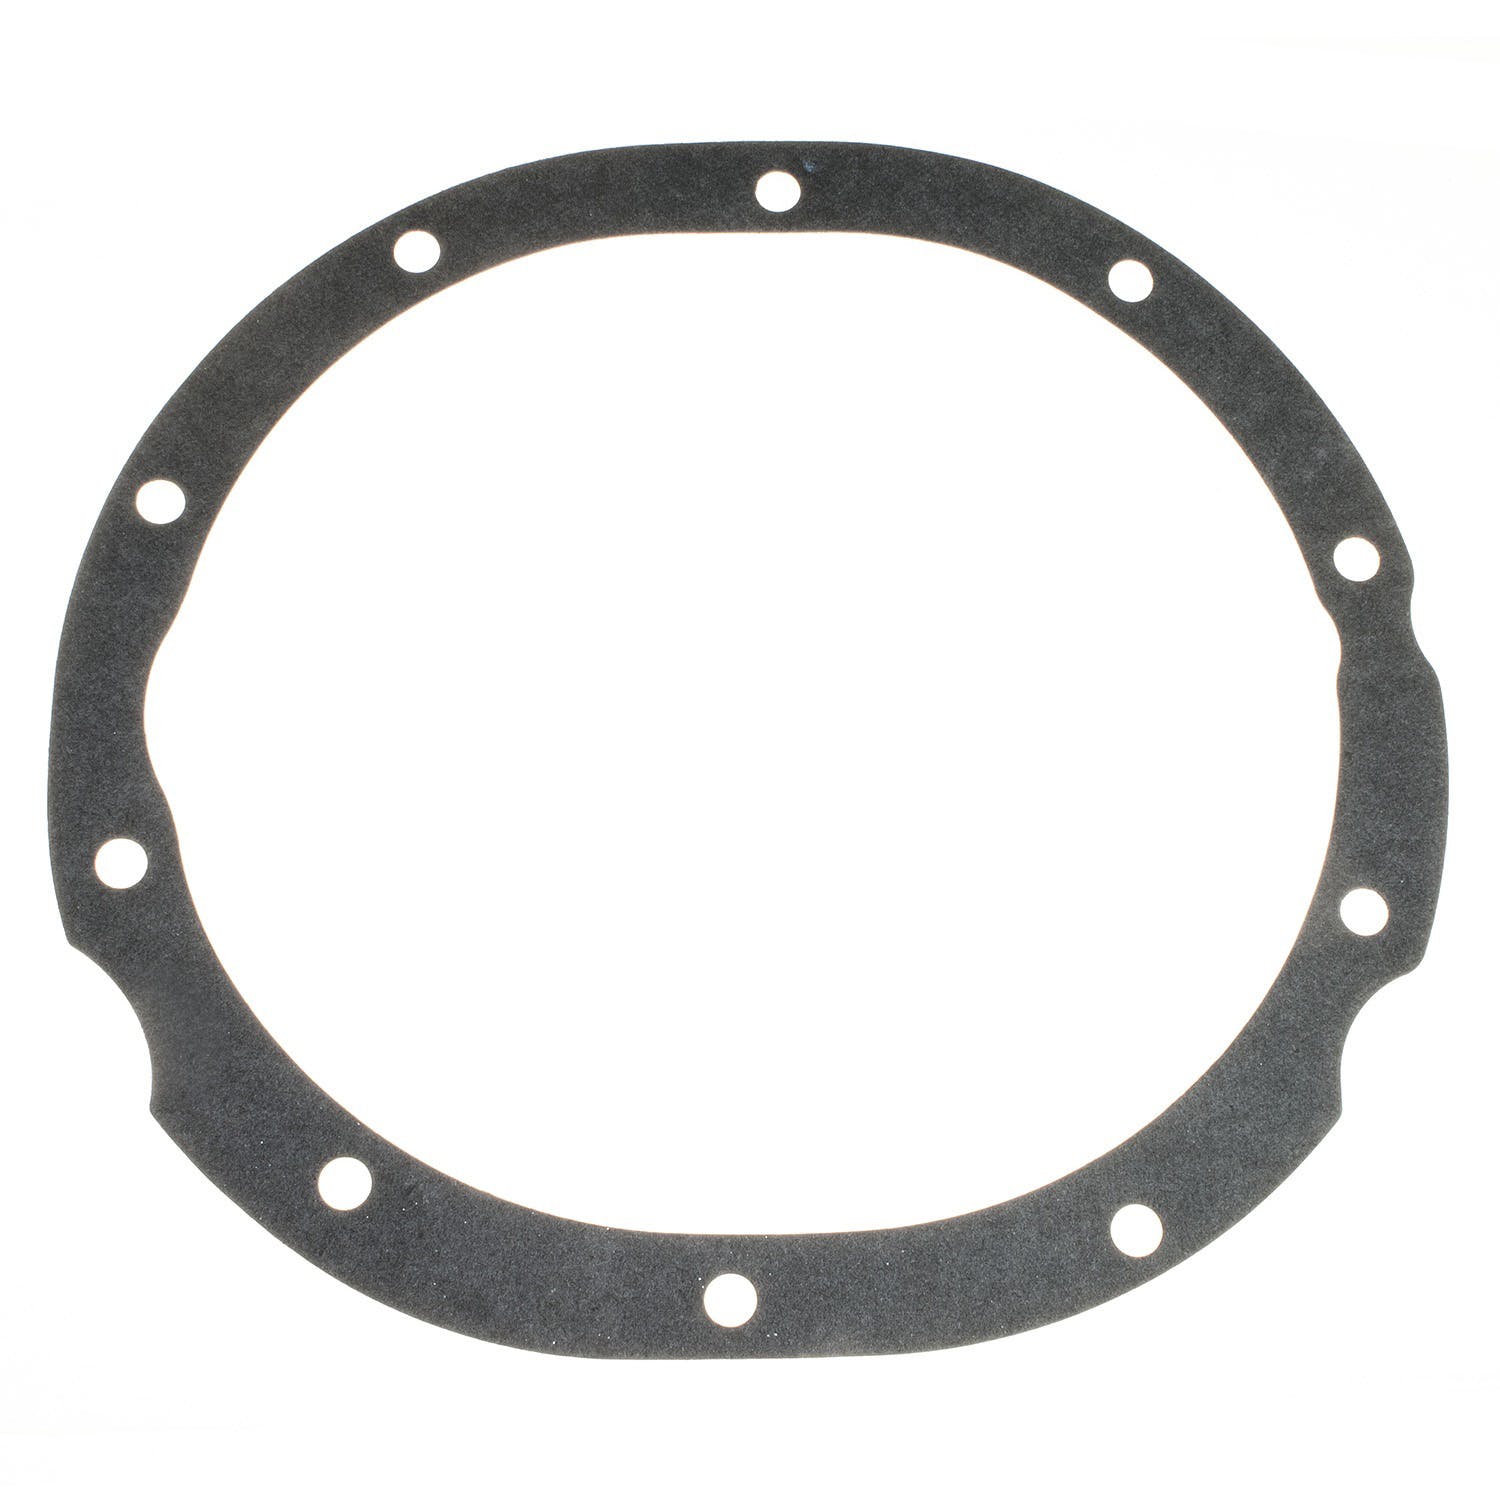 Richmond 14-0010-1 Differential Cover Gasket